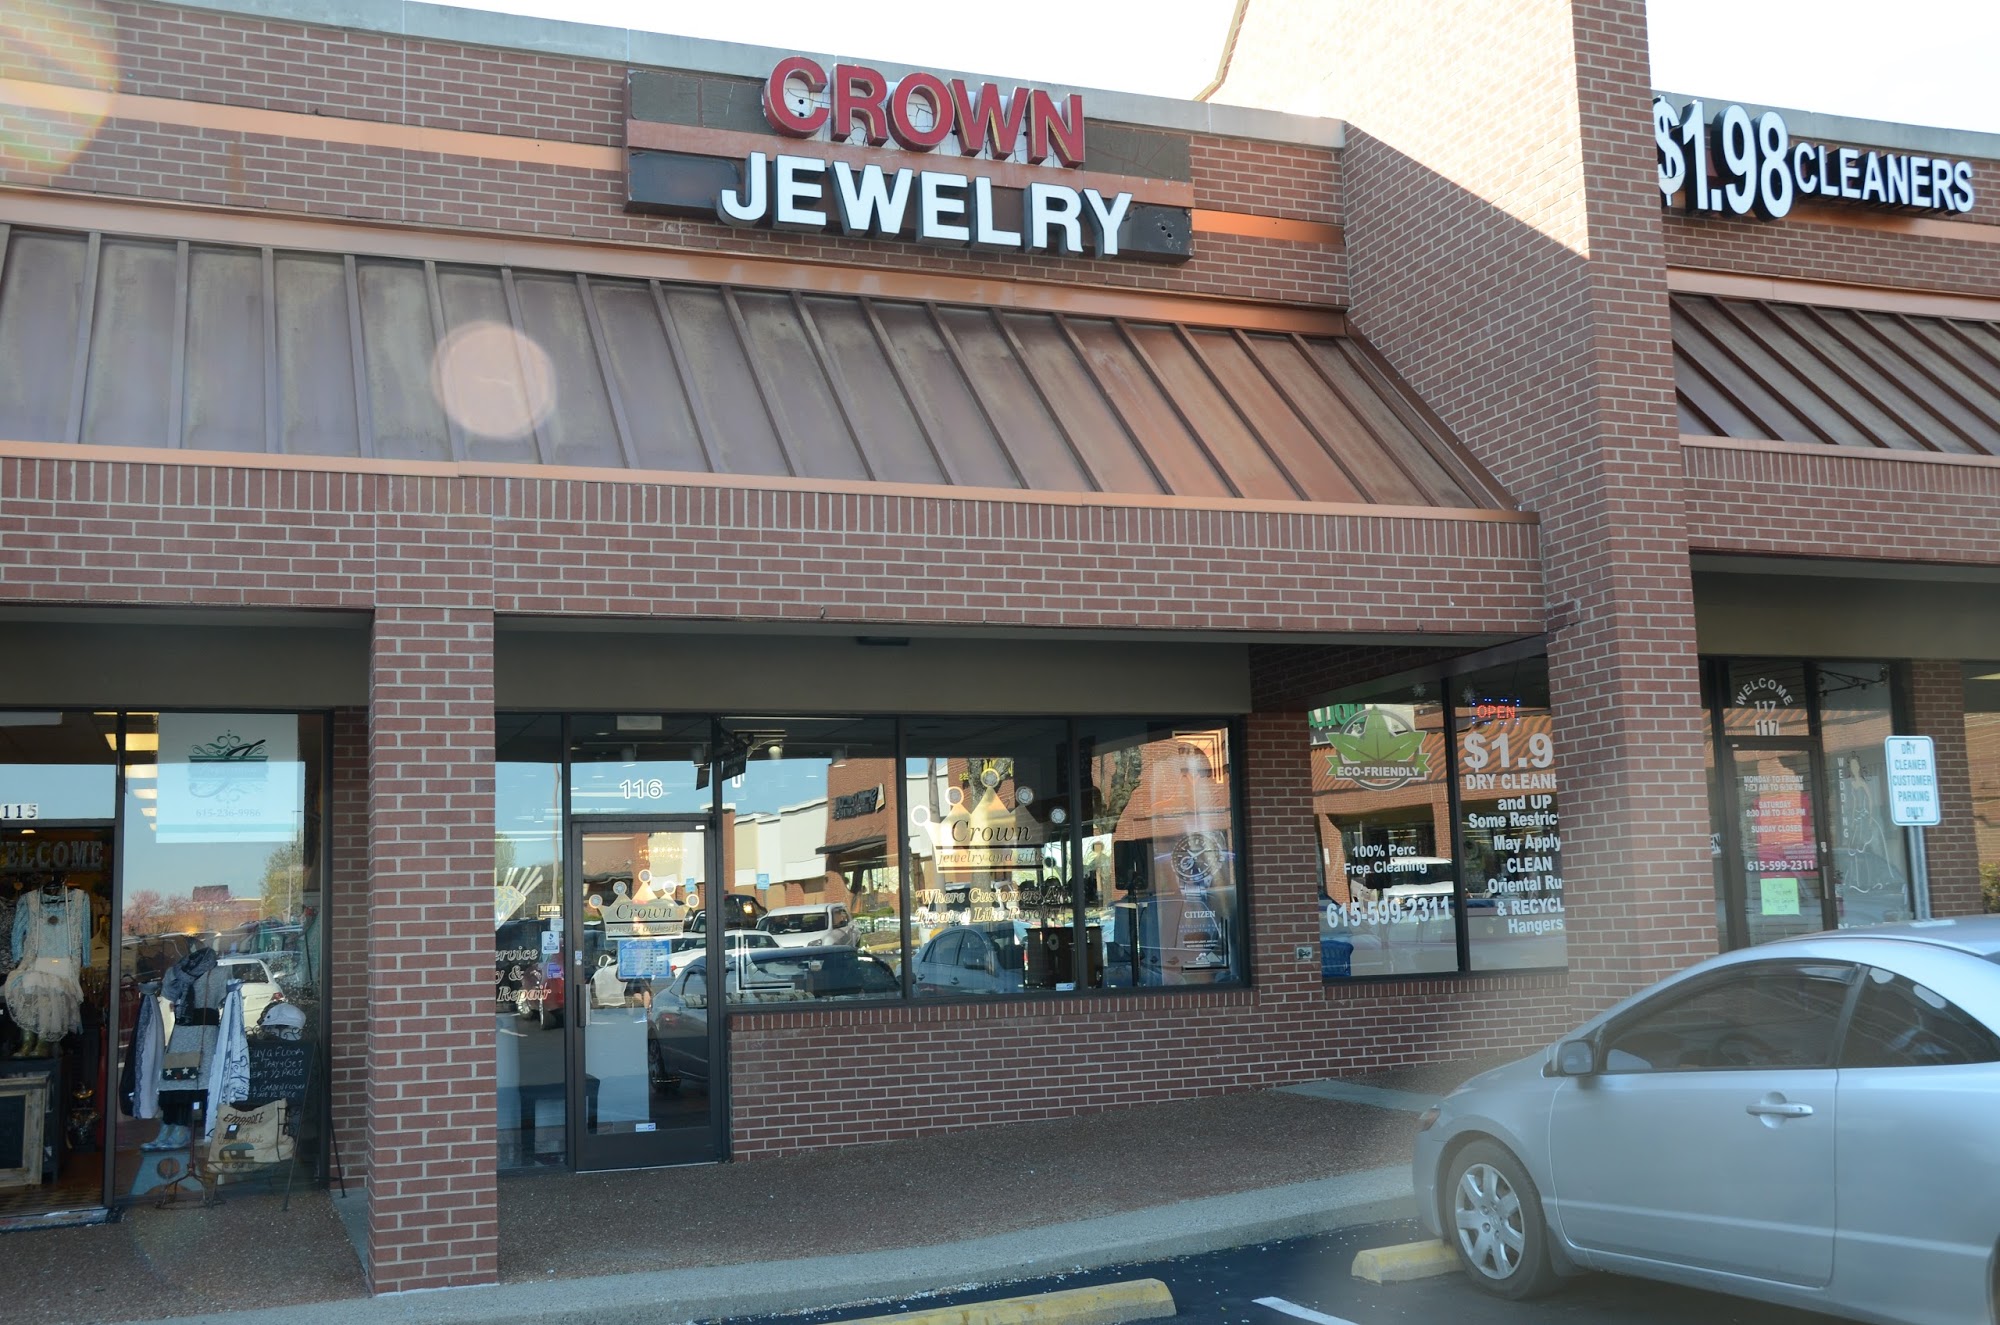 Crown Jewelry & Gifts